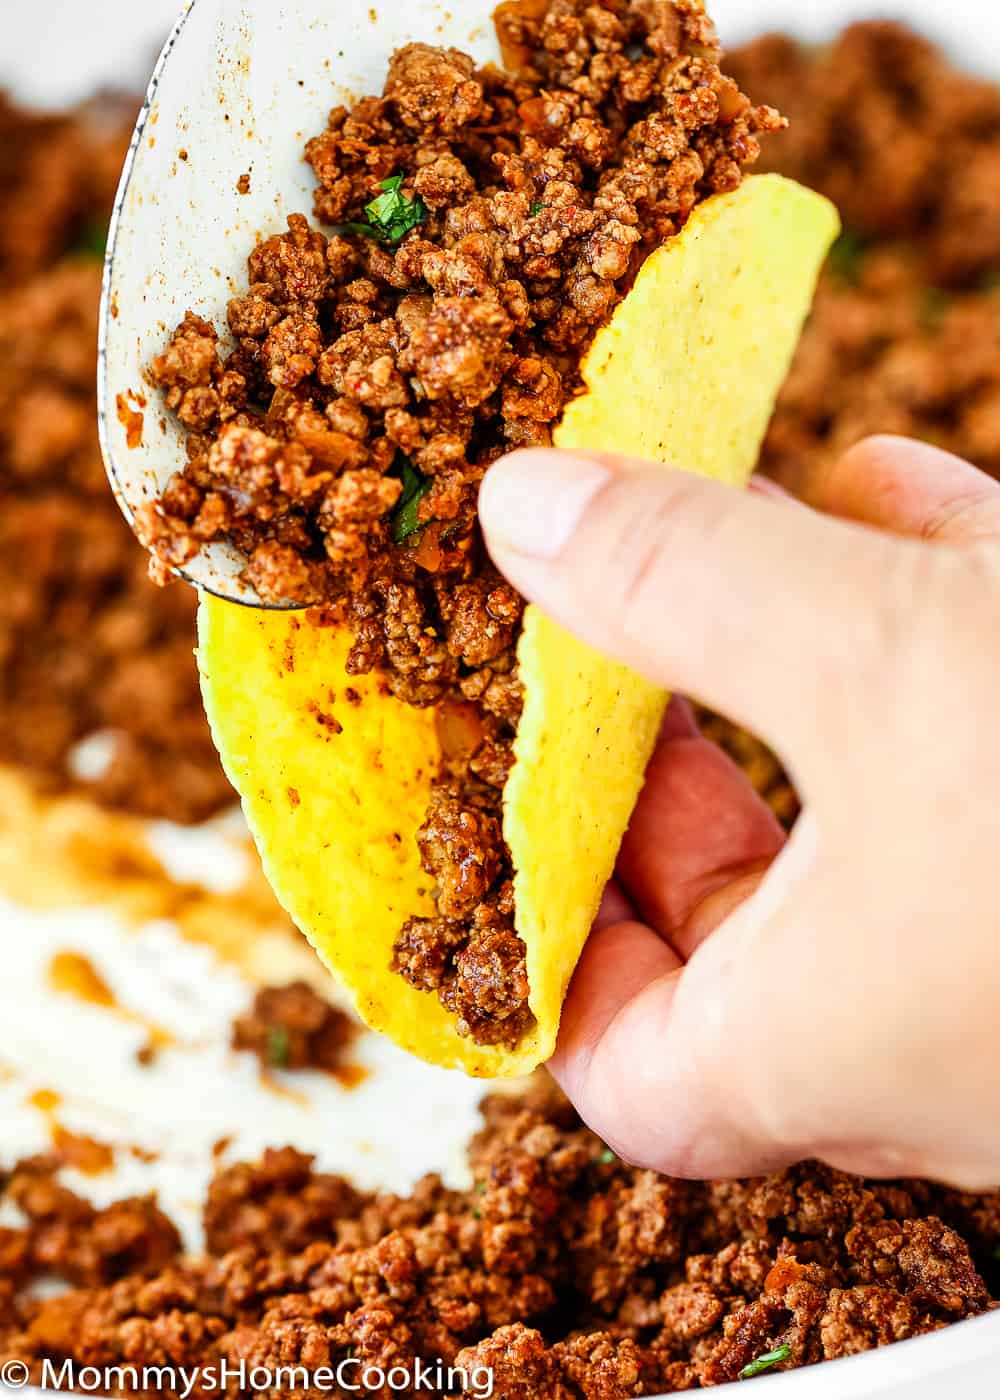 Serving taco ground beef into a taco shell.